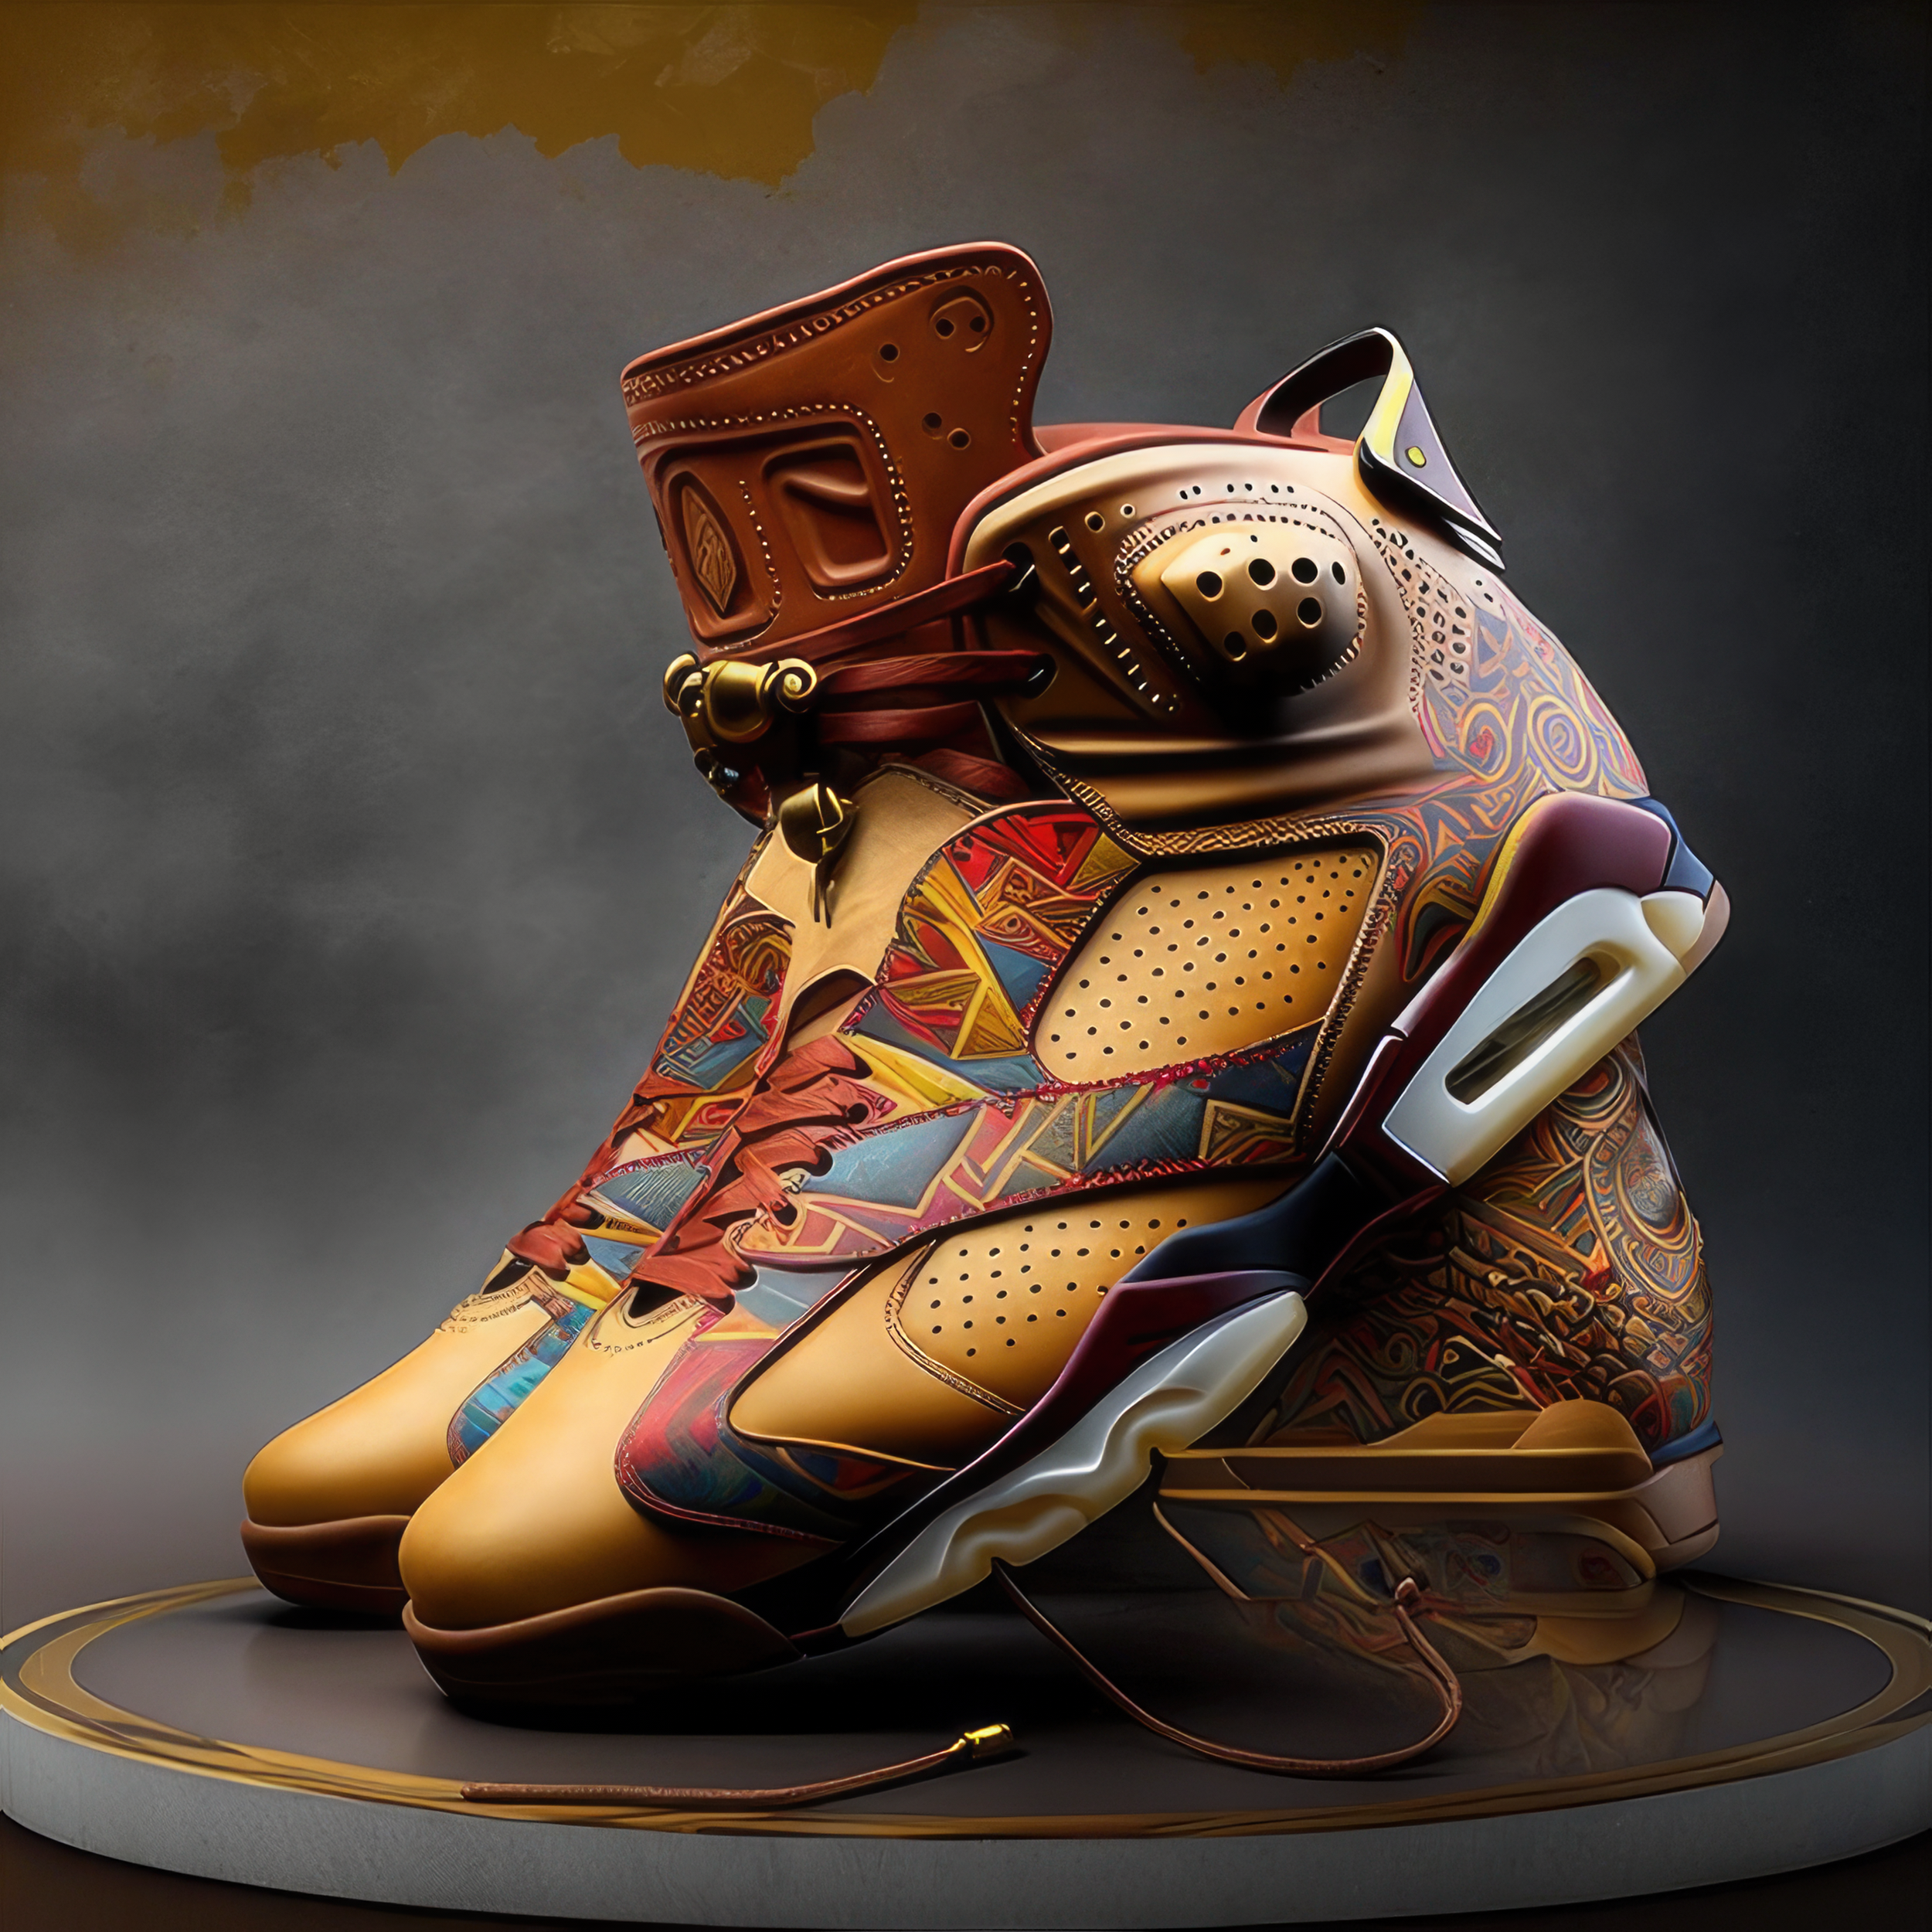 tonycncp_nike_air_jordan_6_e2cc3f1c-d200-4f63-8d5e-9ac7c8458254-gigapixel-standard-scale-6_00x.png